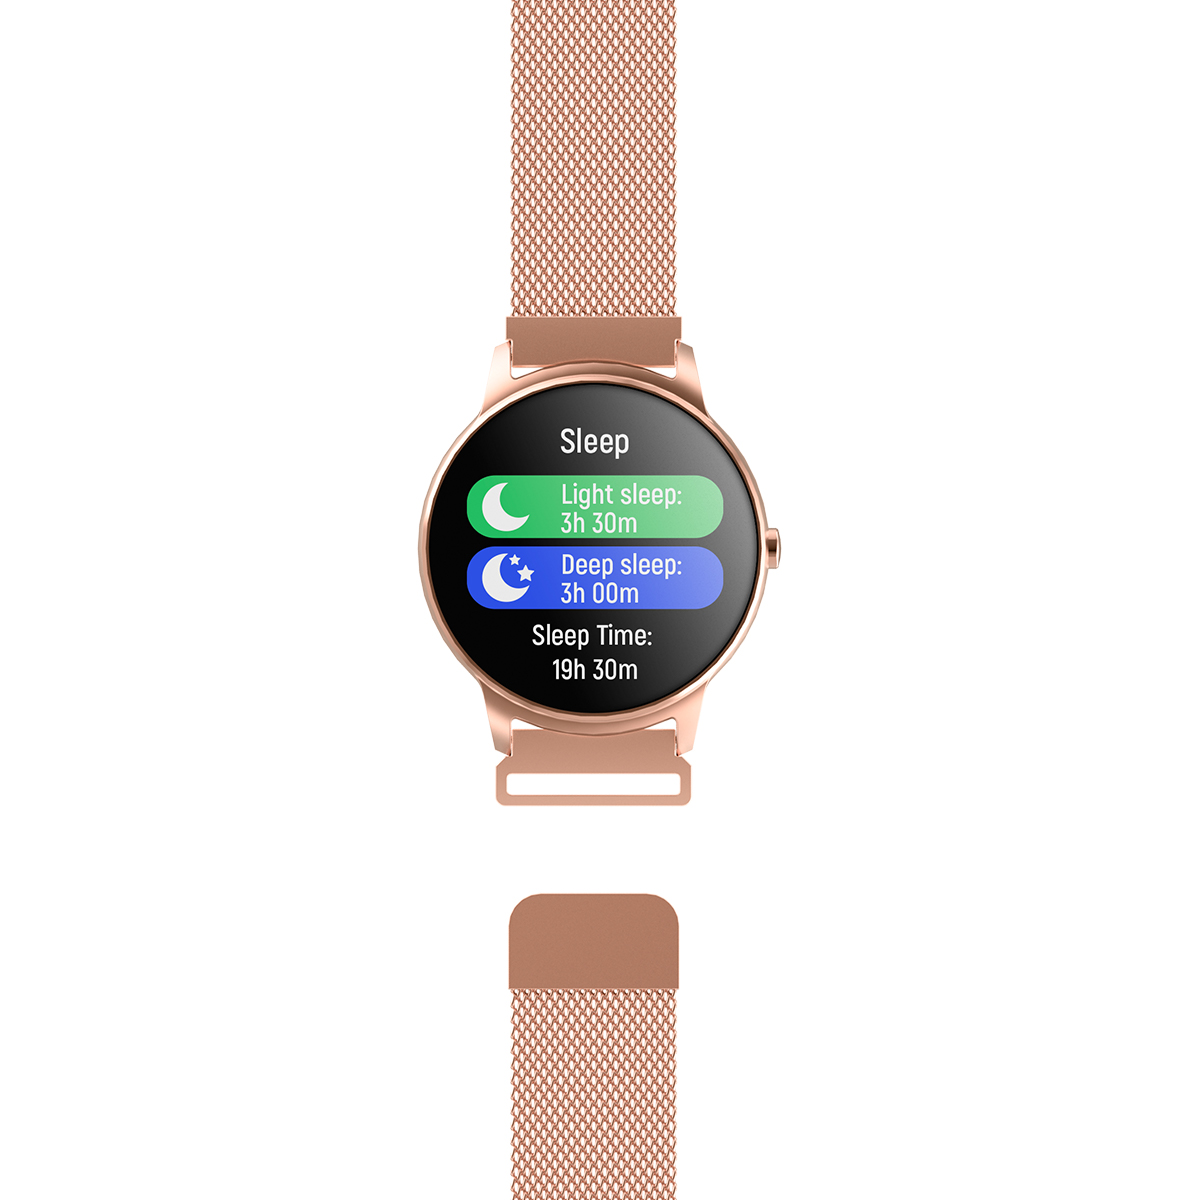 Forever smartwatch ForeVive 2 SB-330 rowe zoto / 5